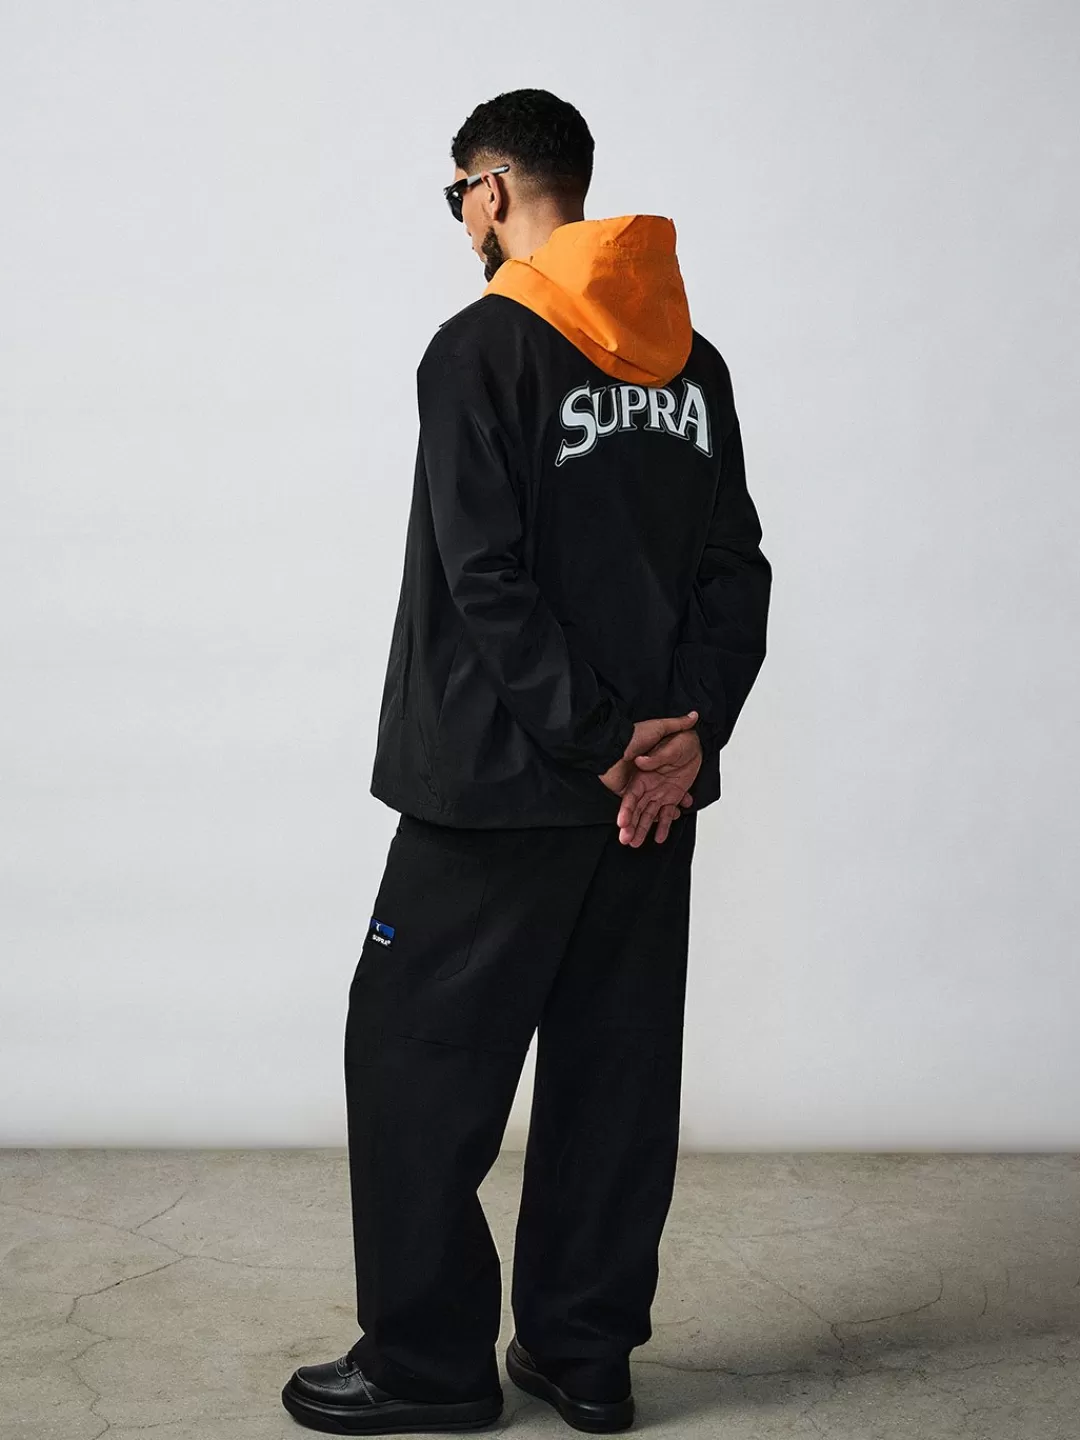 BAYC Back Graphic Woven Coach Jacket^Supra Best Sale